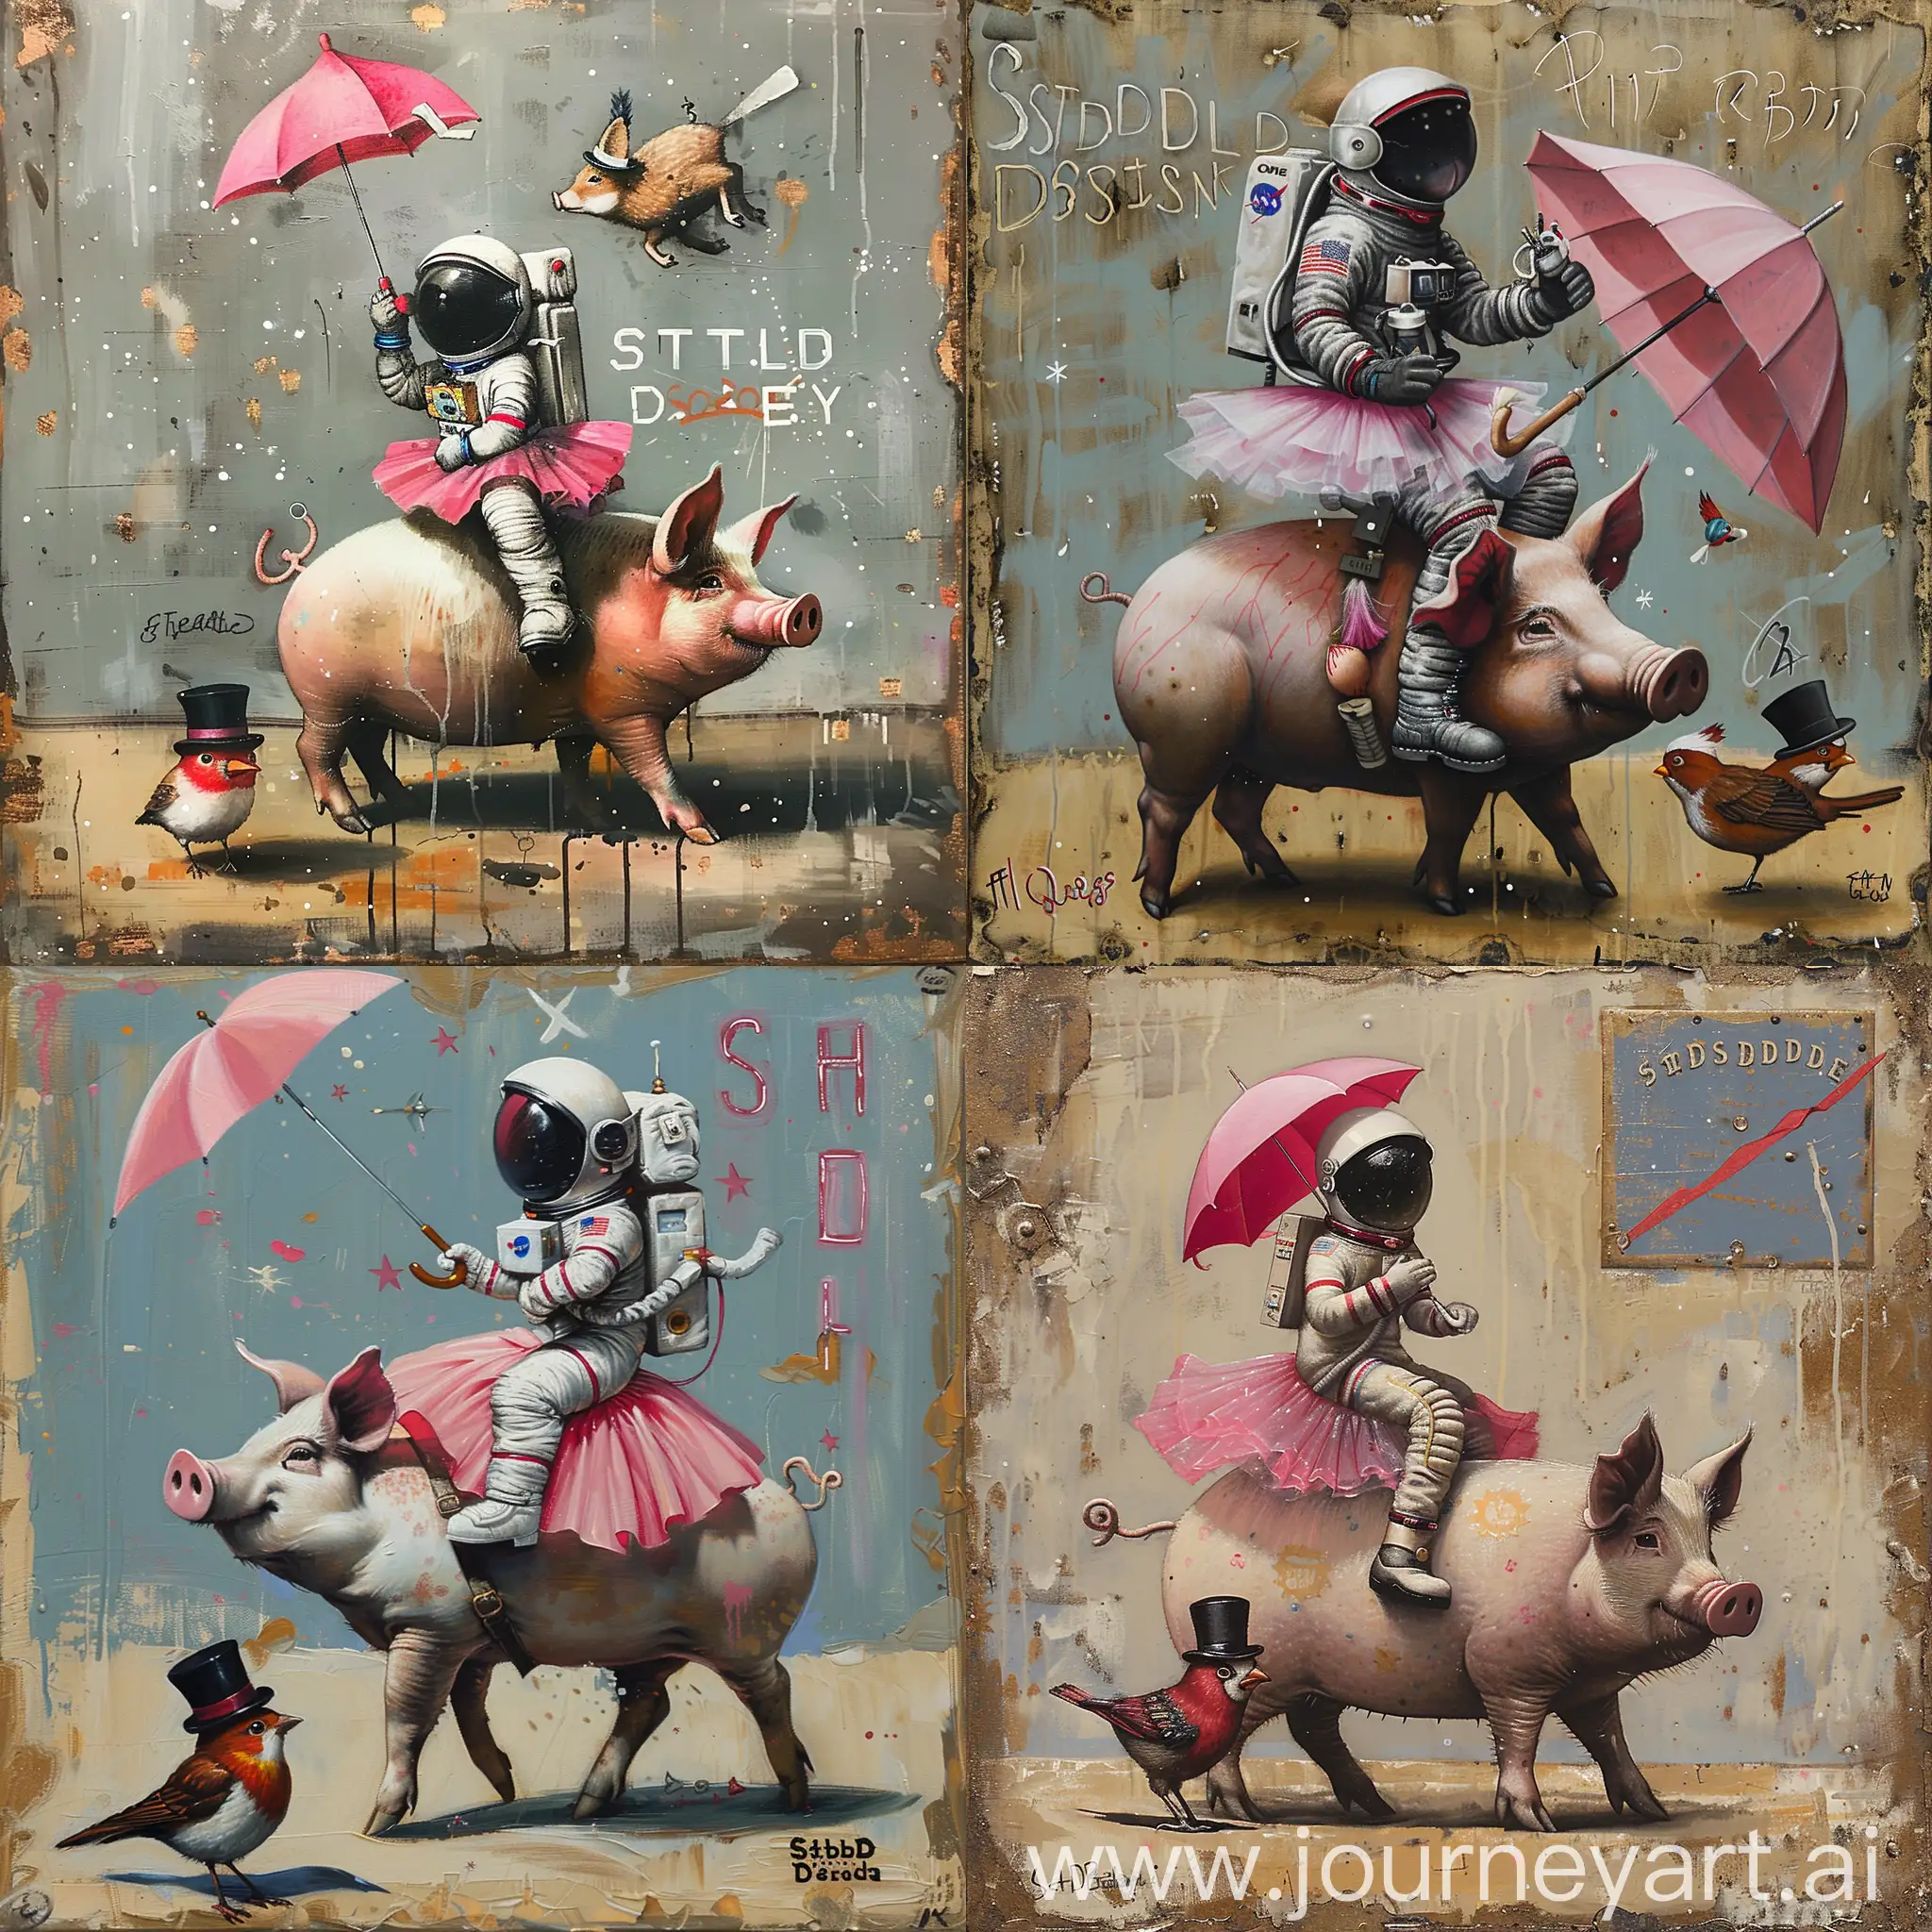 Whimsical-Astronaut-Pig-Rider-with-Tutu-and-Pink-Umbrella